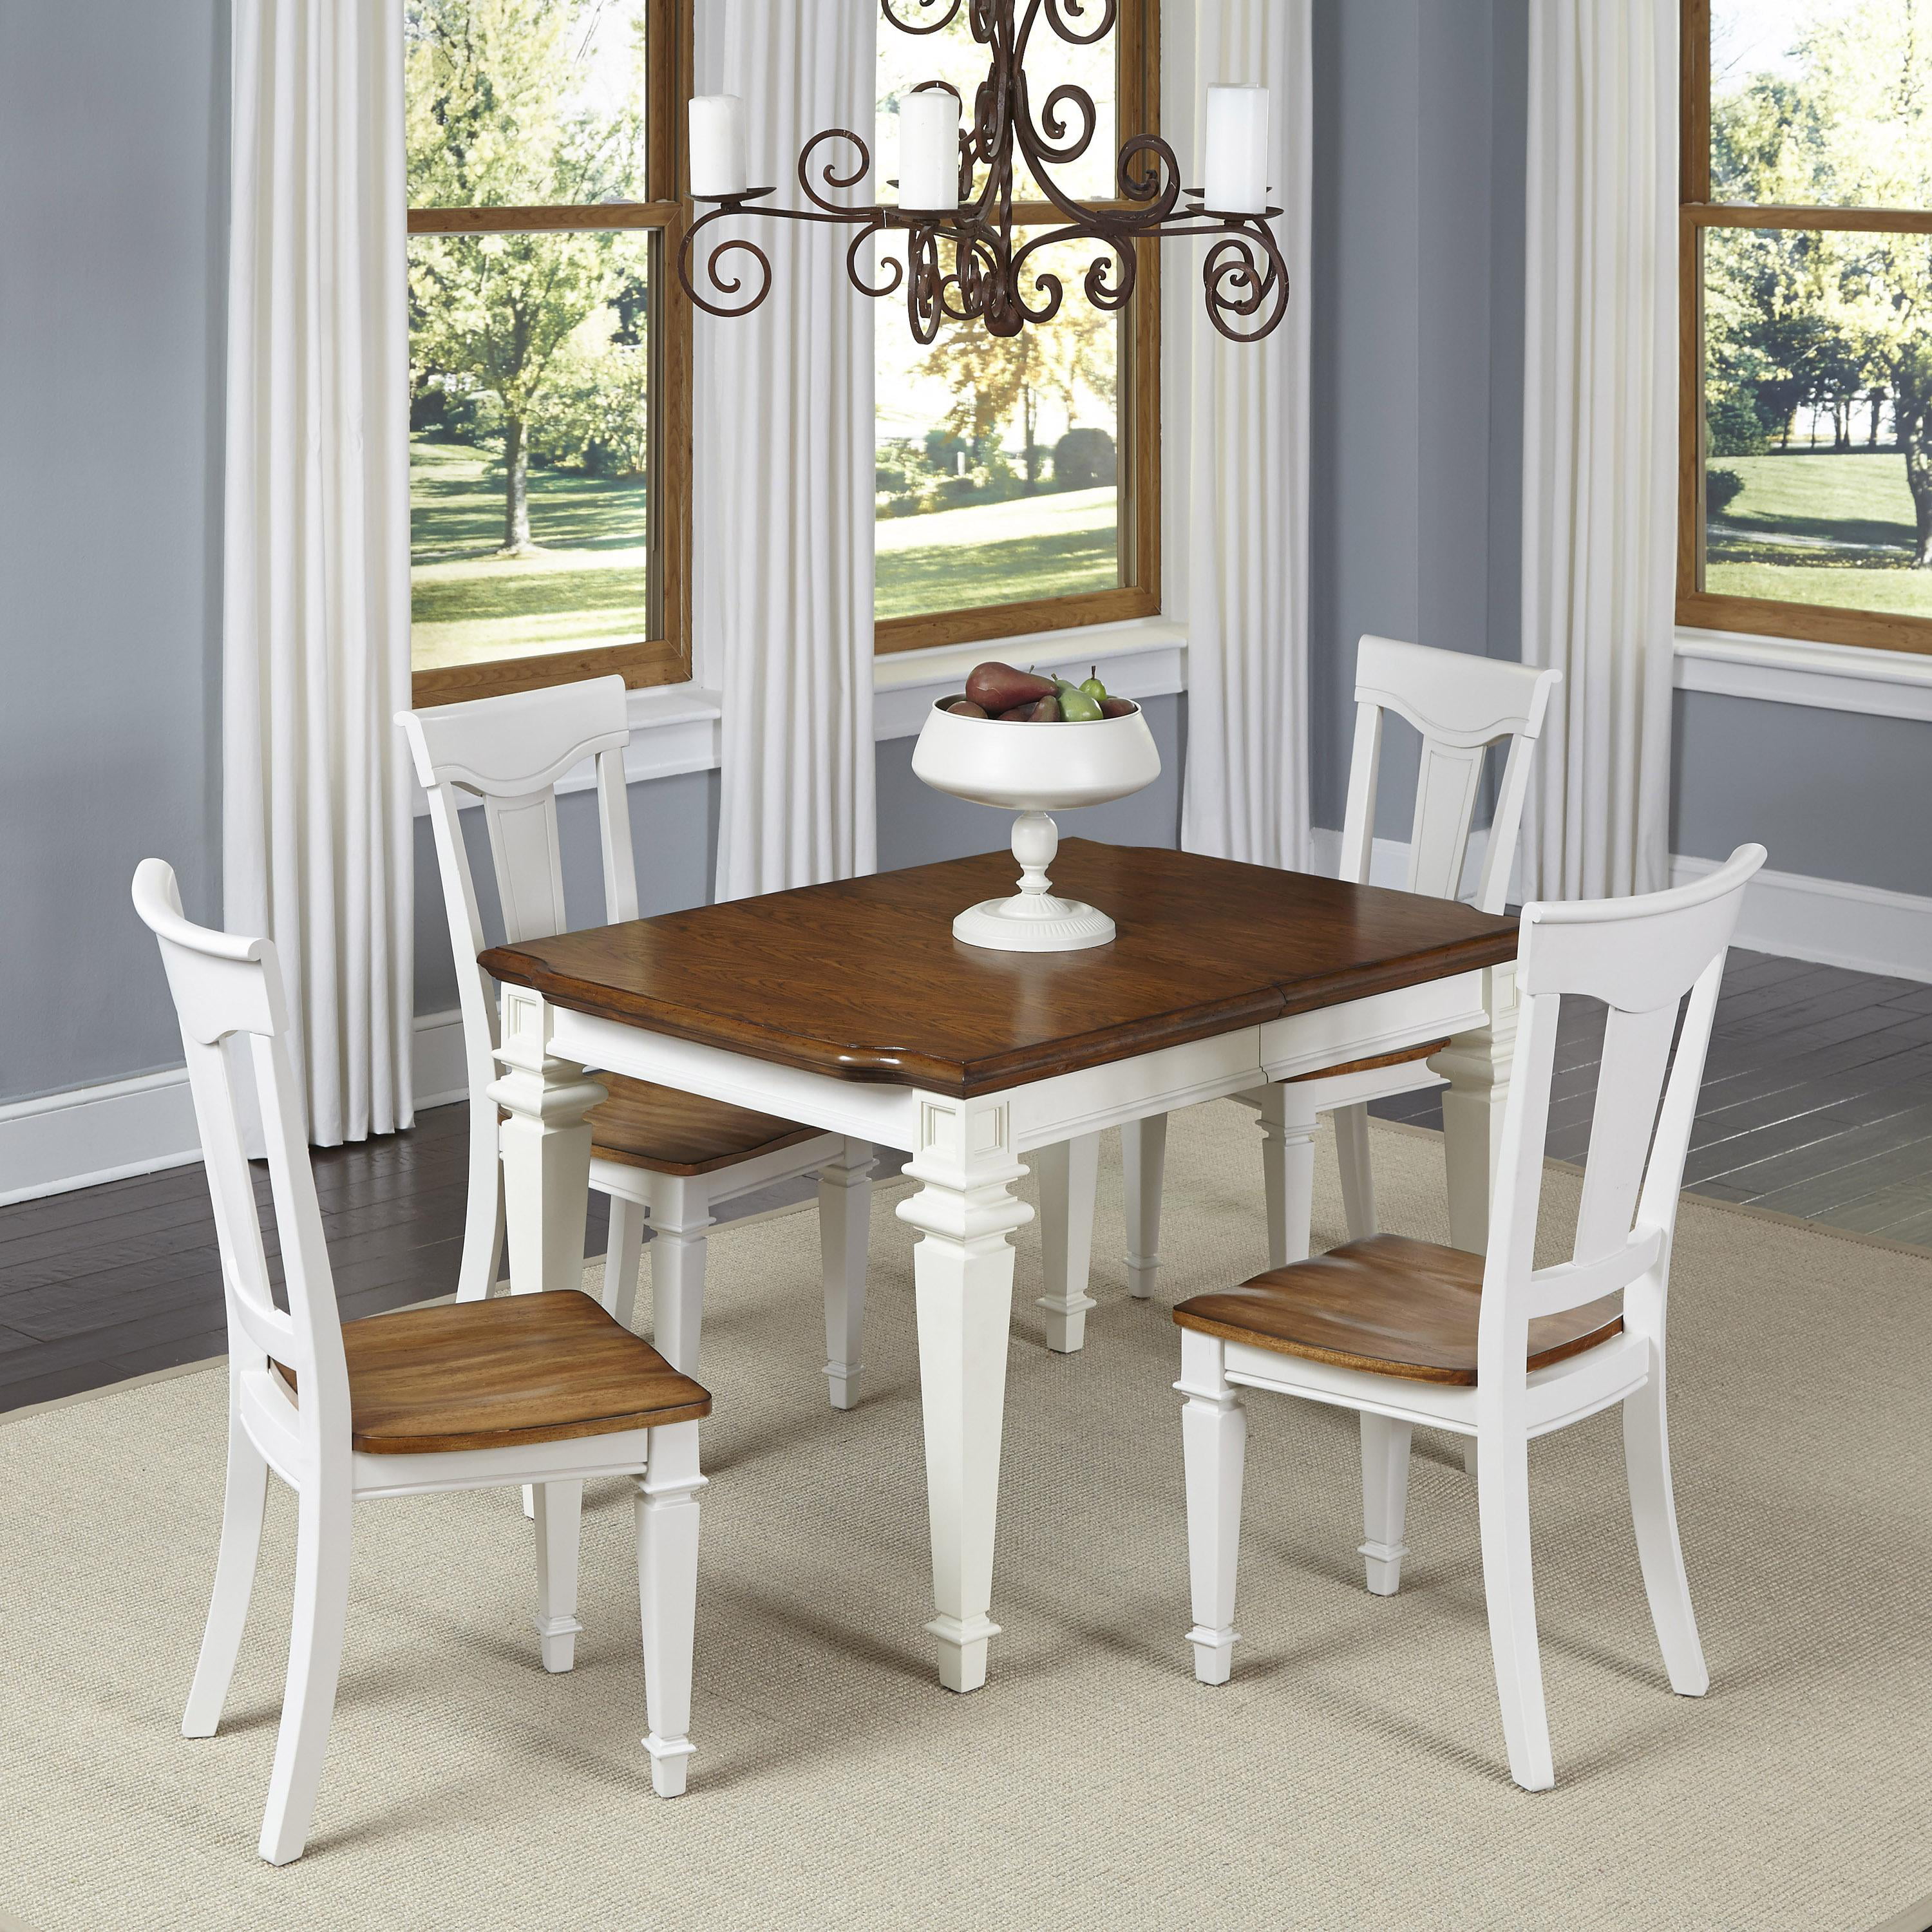 Dining Table with Four Chairs - Walmart.com